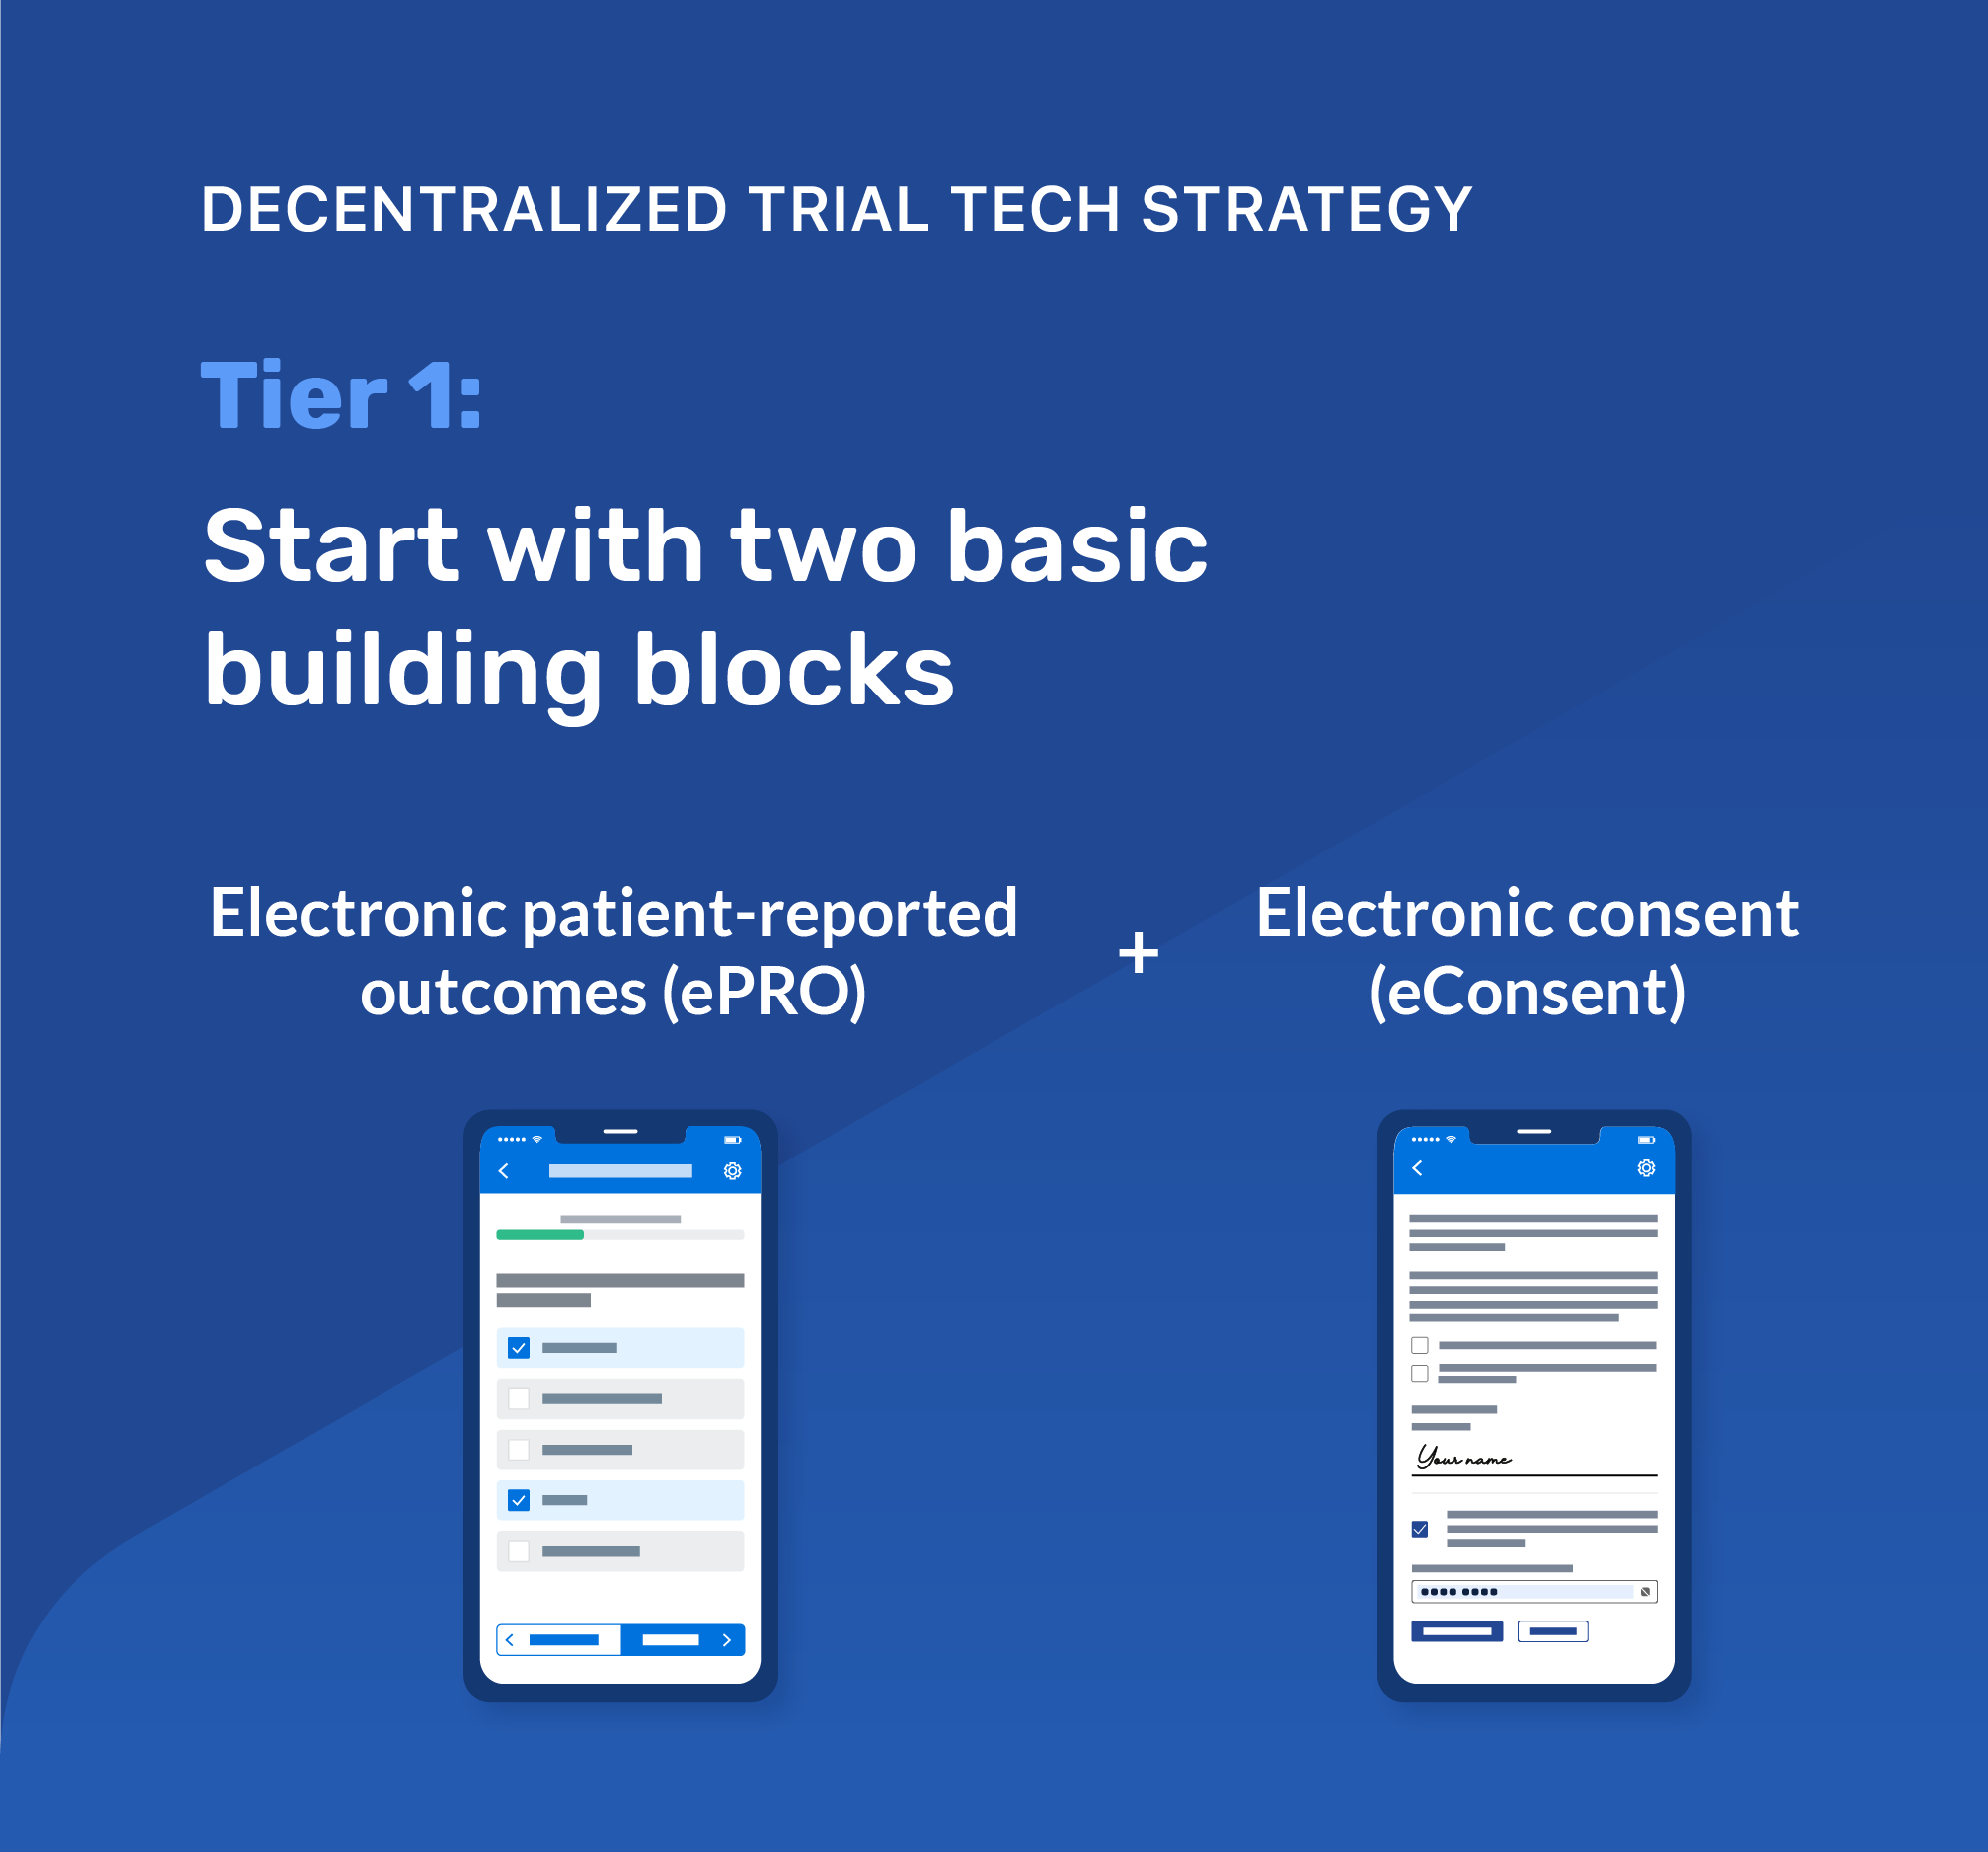 Tier 1 Clinical Trial tech strategy